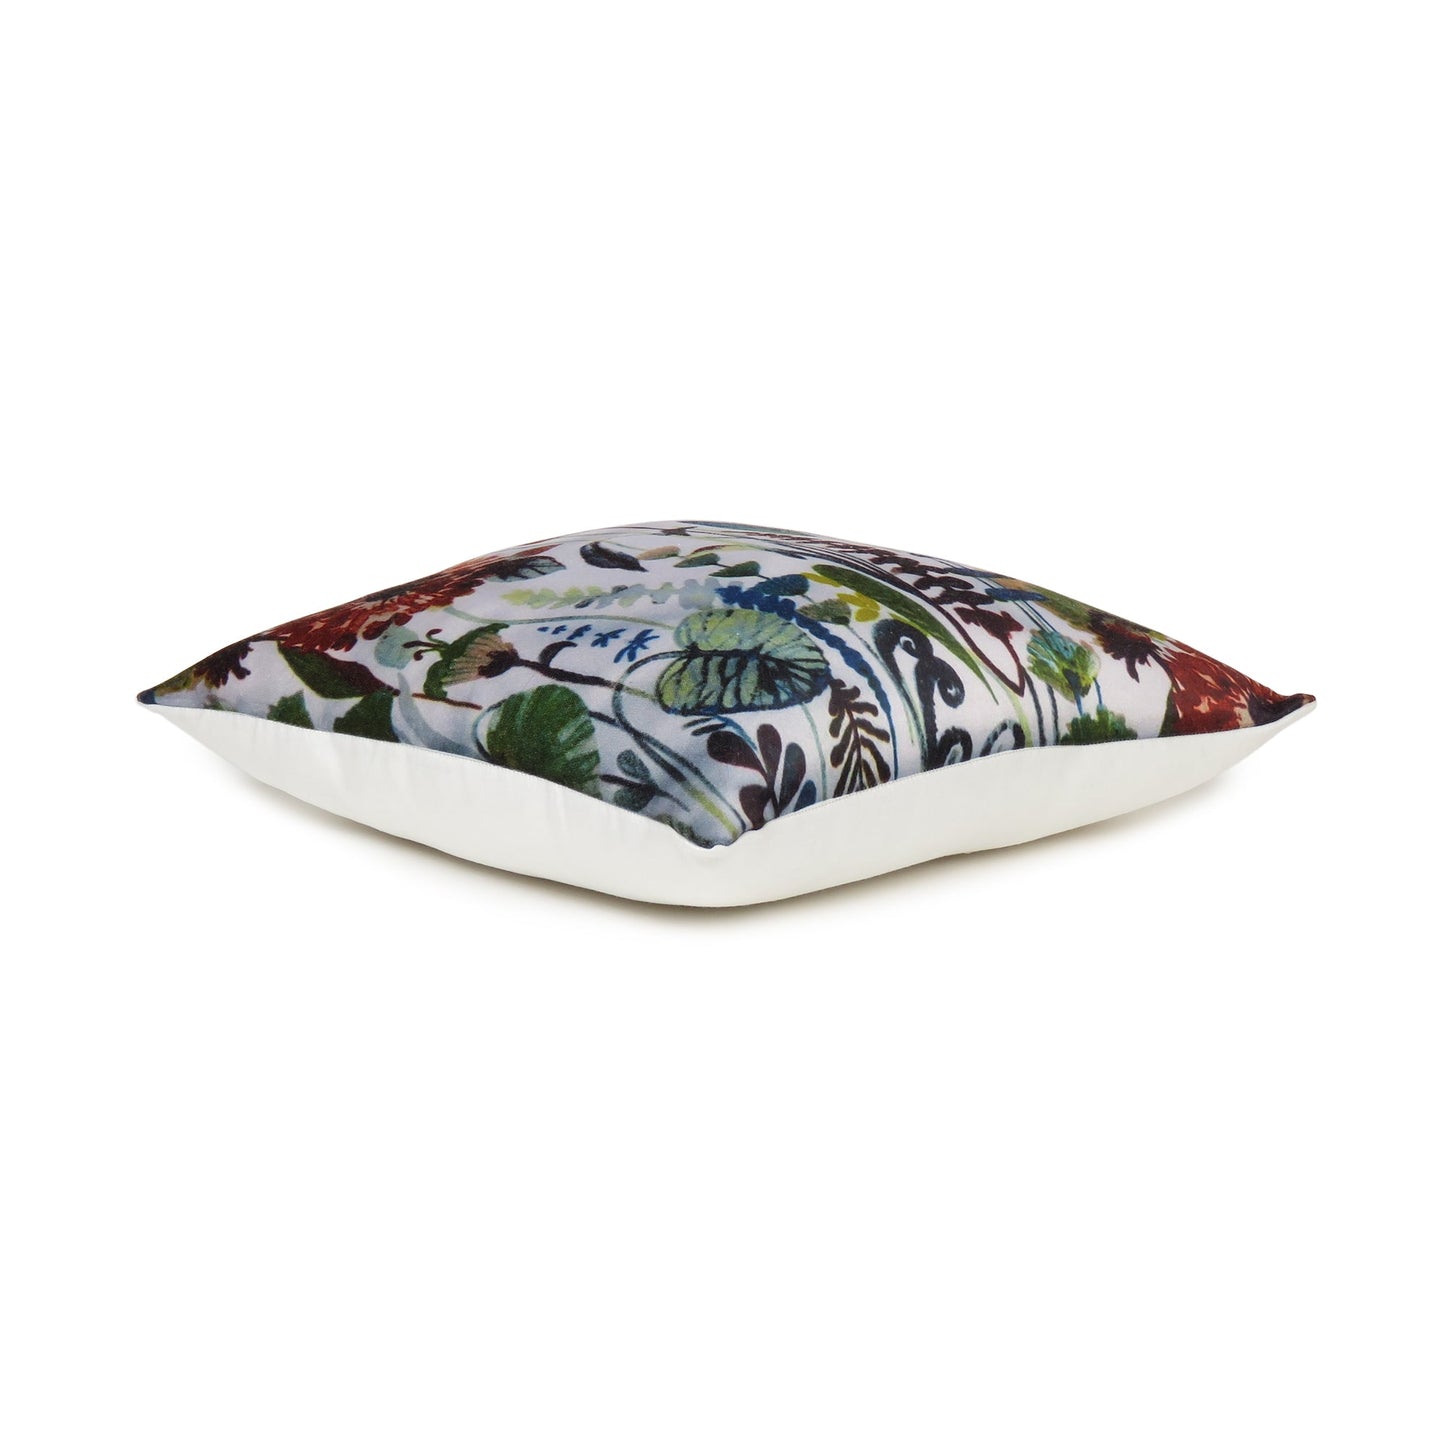 Multicolor Tropical Leaf Printed Cushion Cover in Set of 2